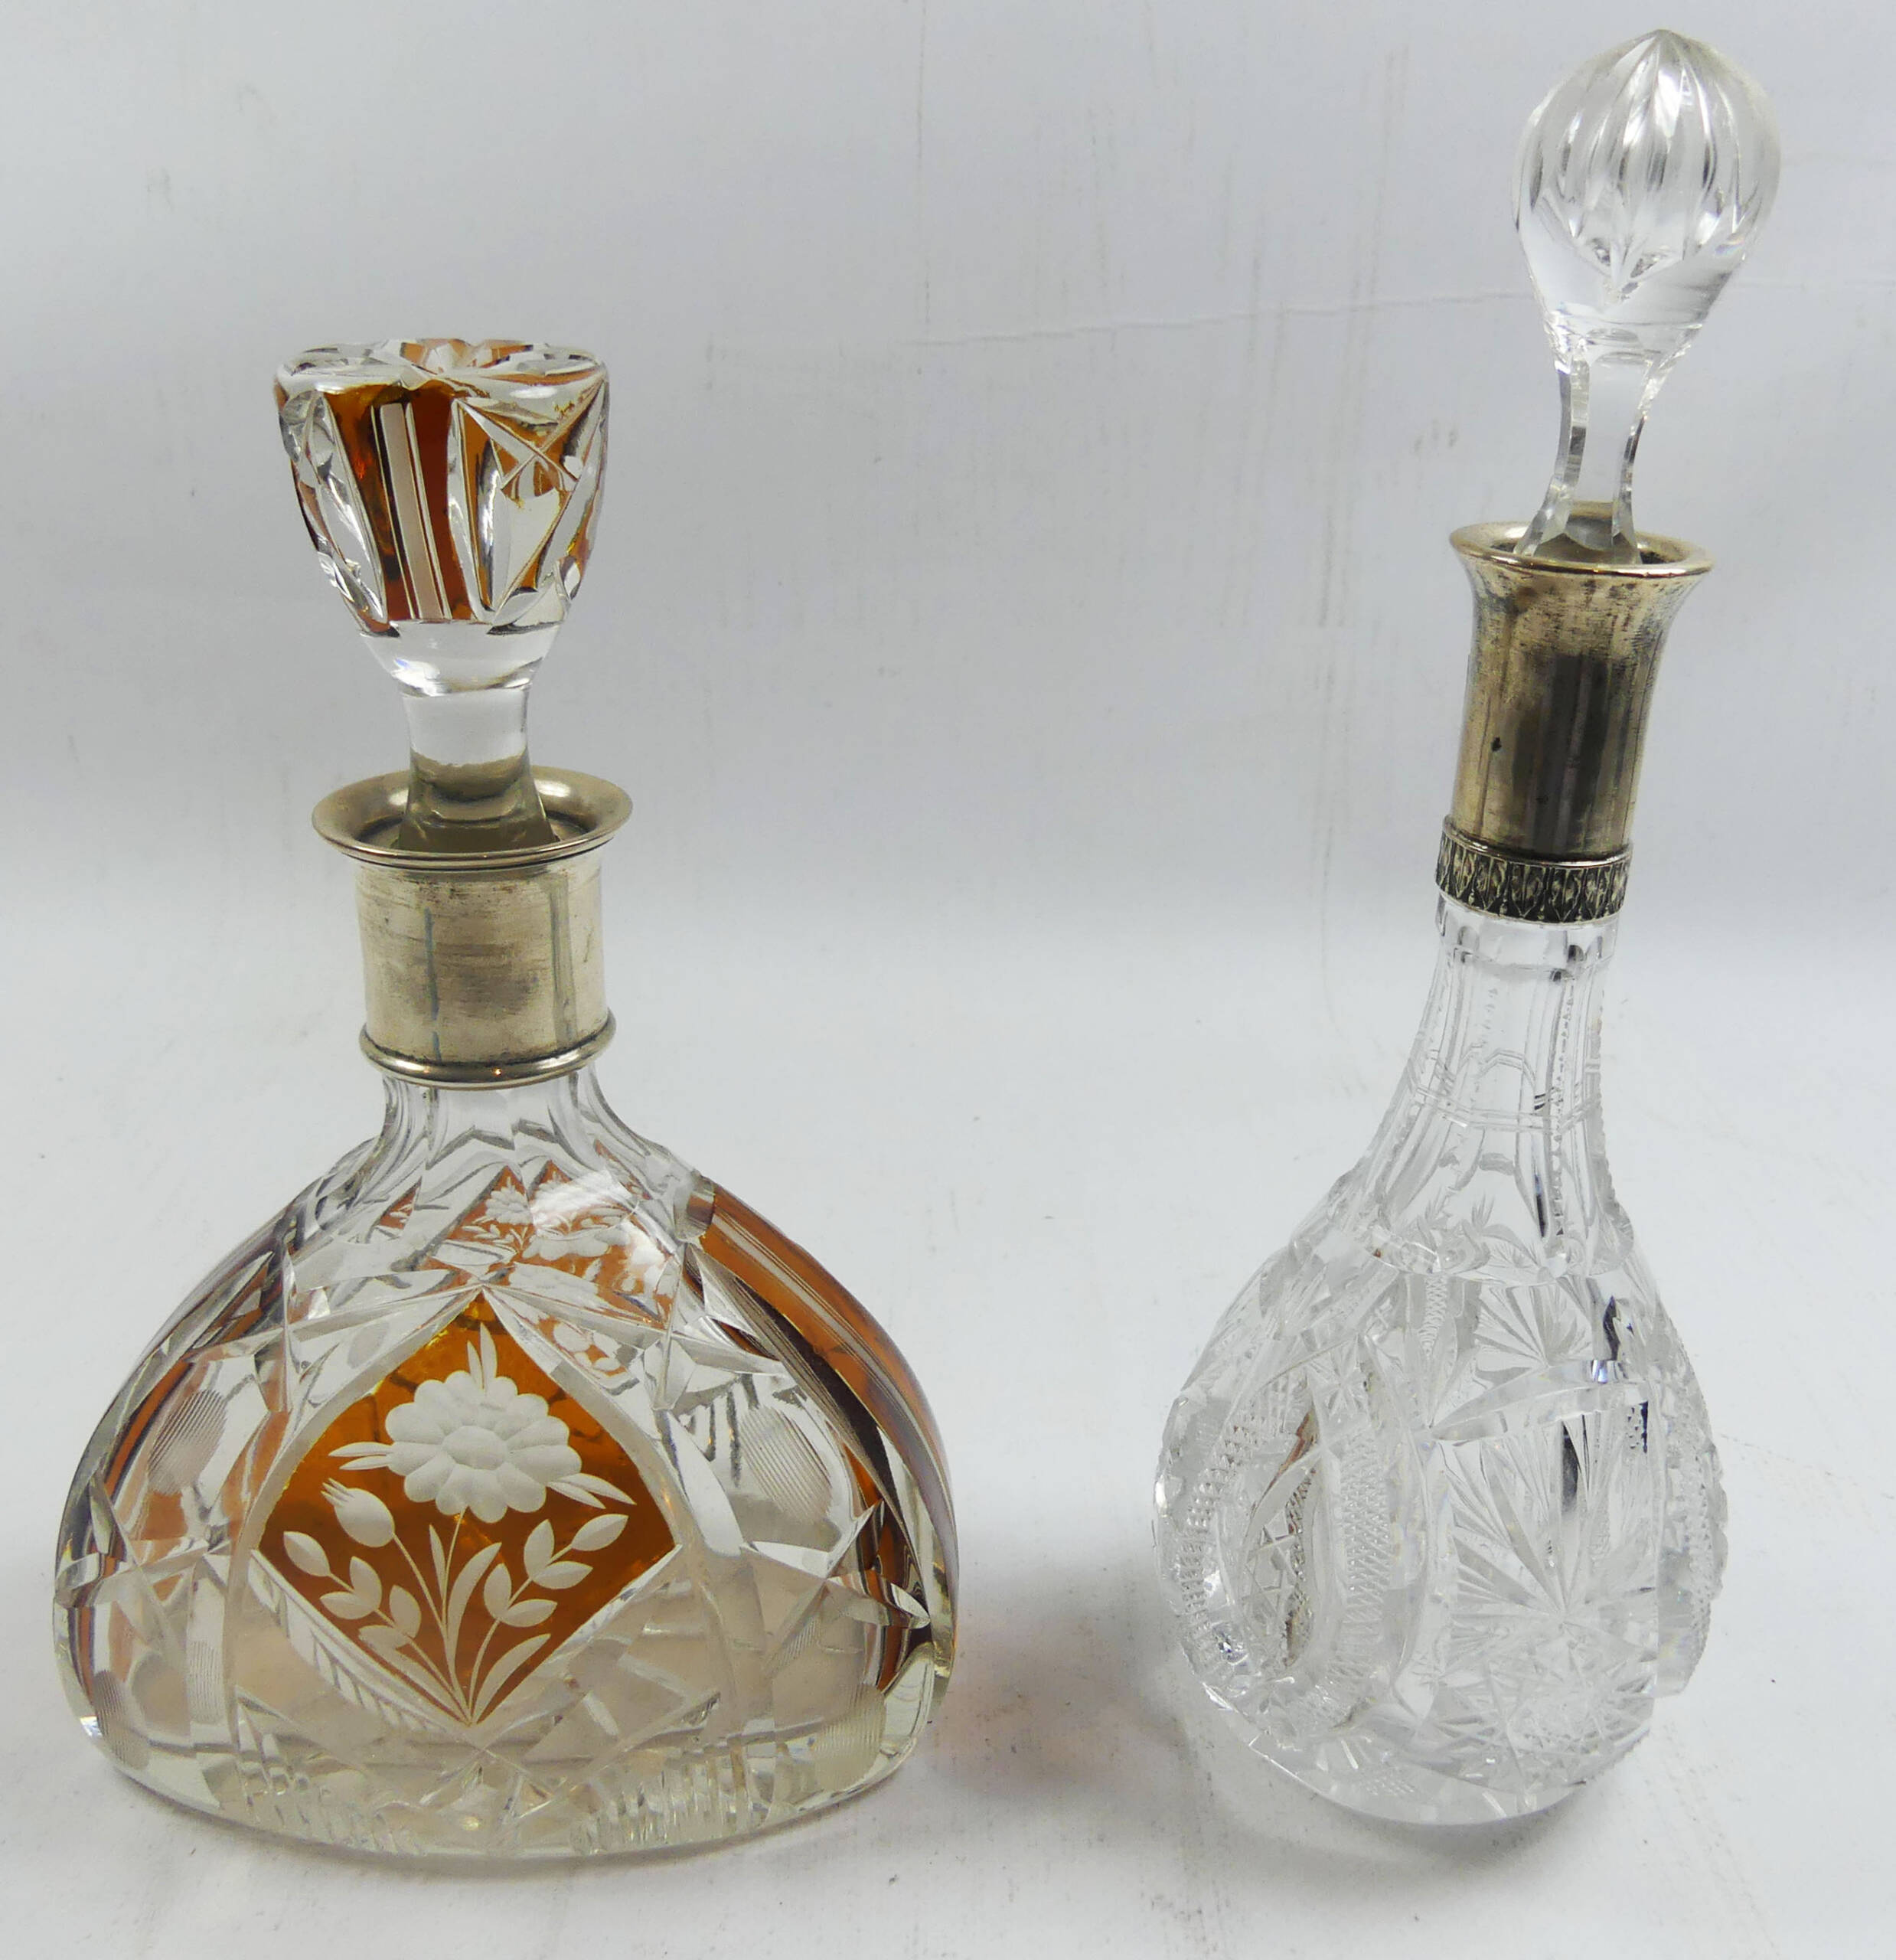 Two Silver Top Decanters